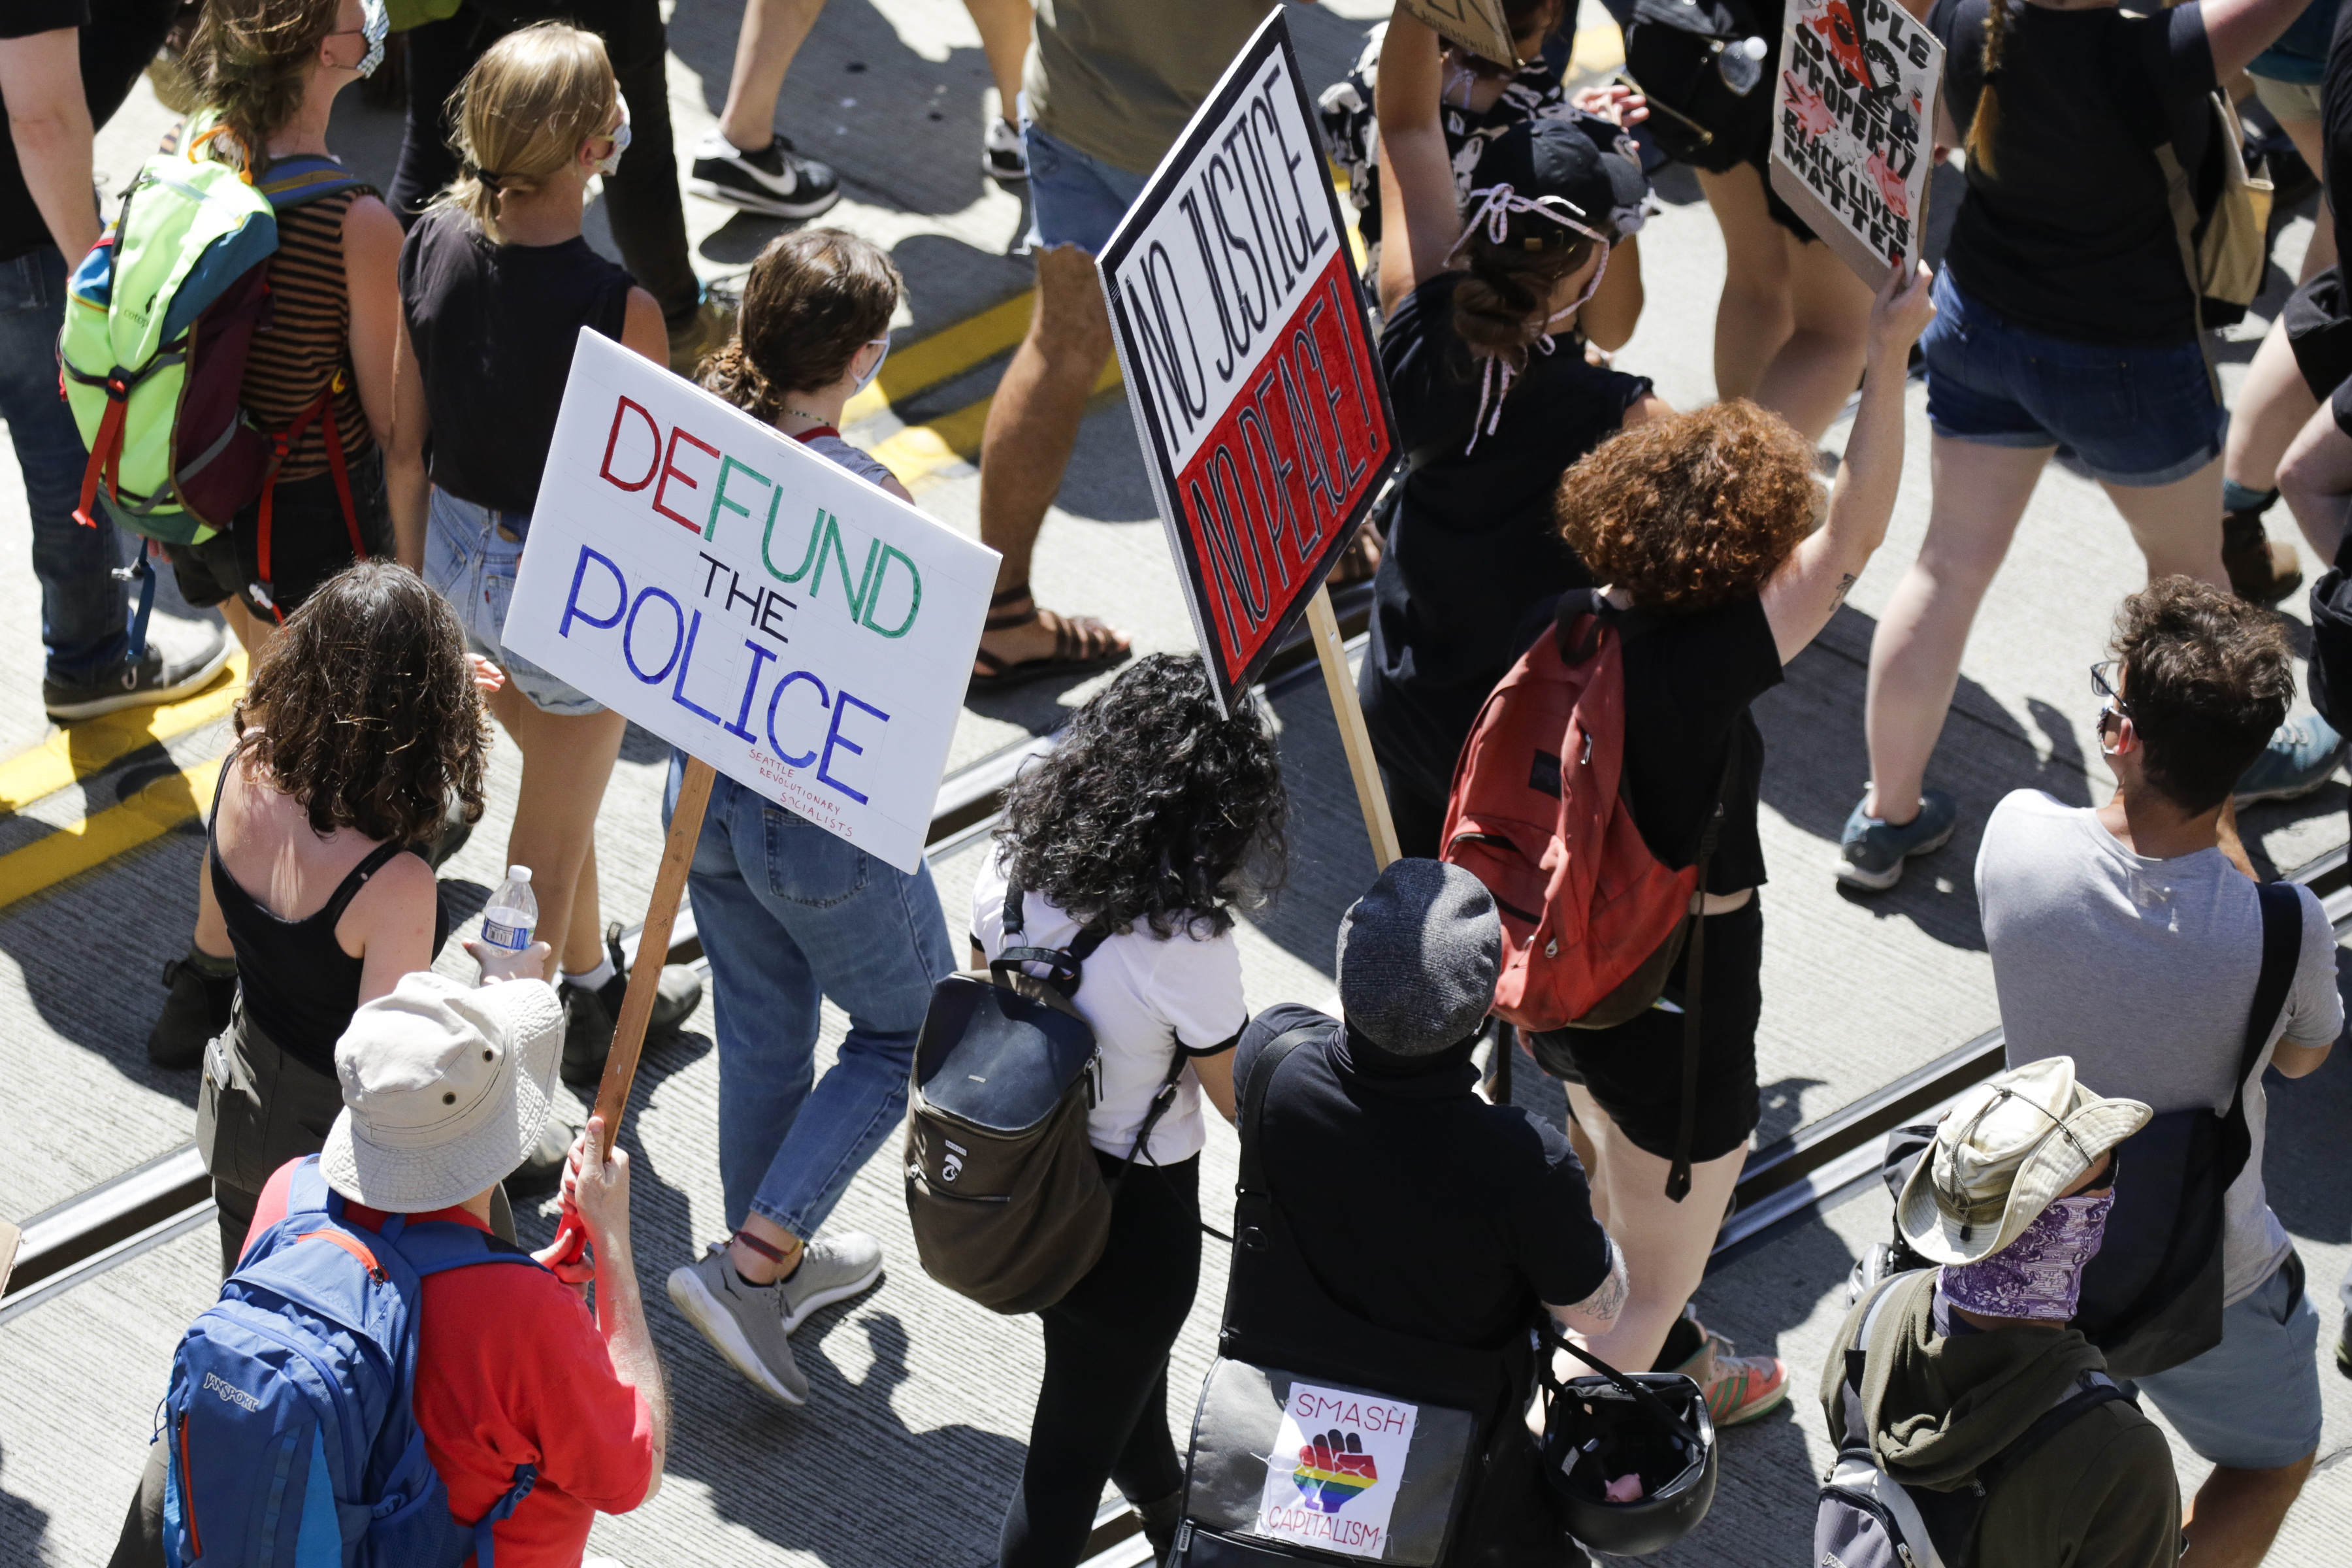 People carry signs during a "Defund the Police" march from King County Youth Jail to City Hall in Seattle, Washington on August 5, 2020. (Photo by Jason Redmond/AFP via Getty Images)